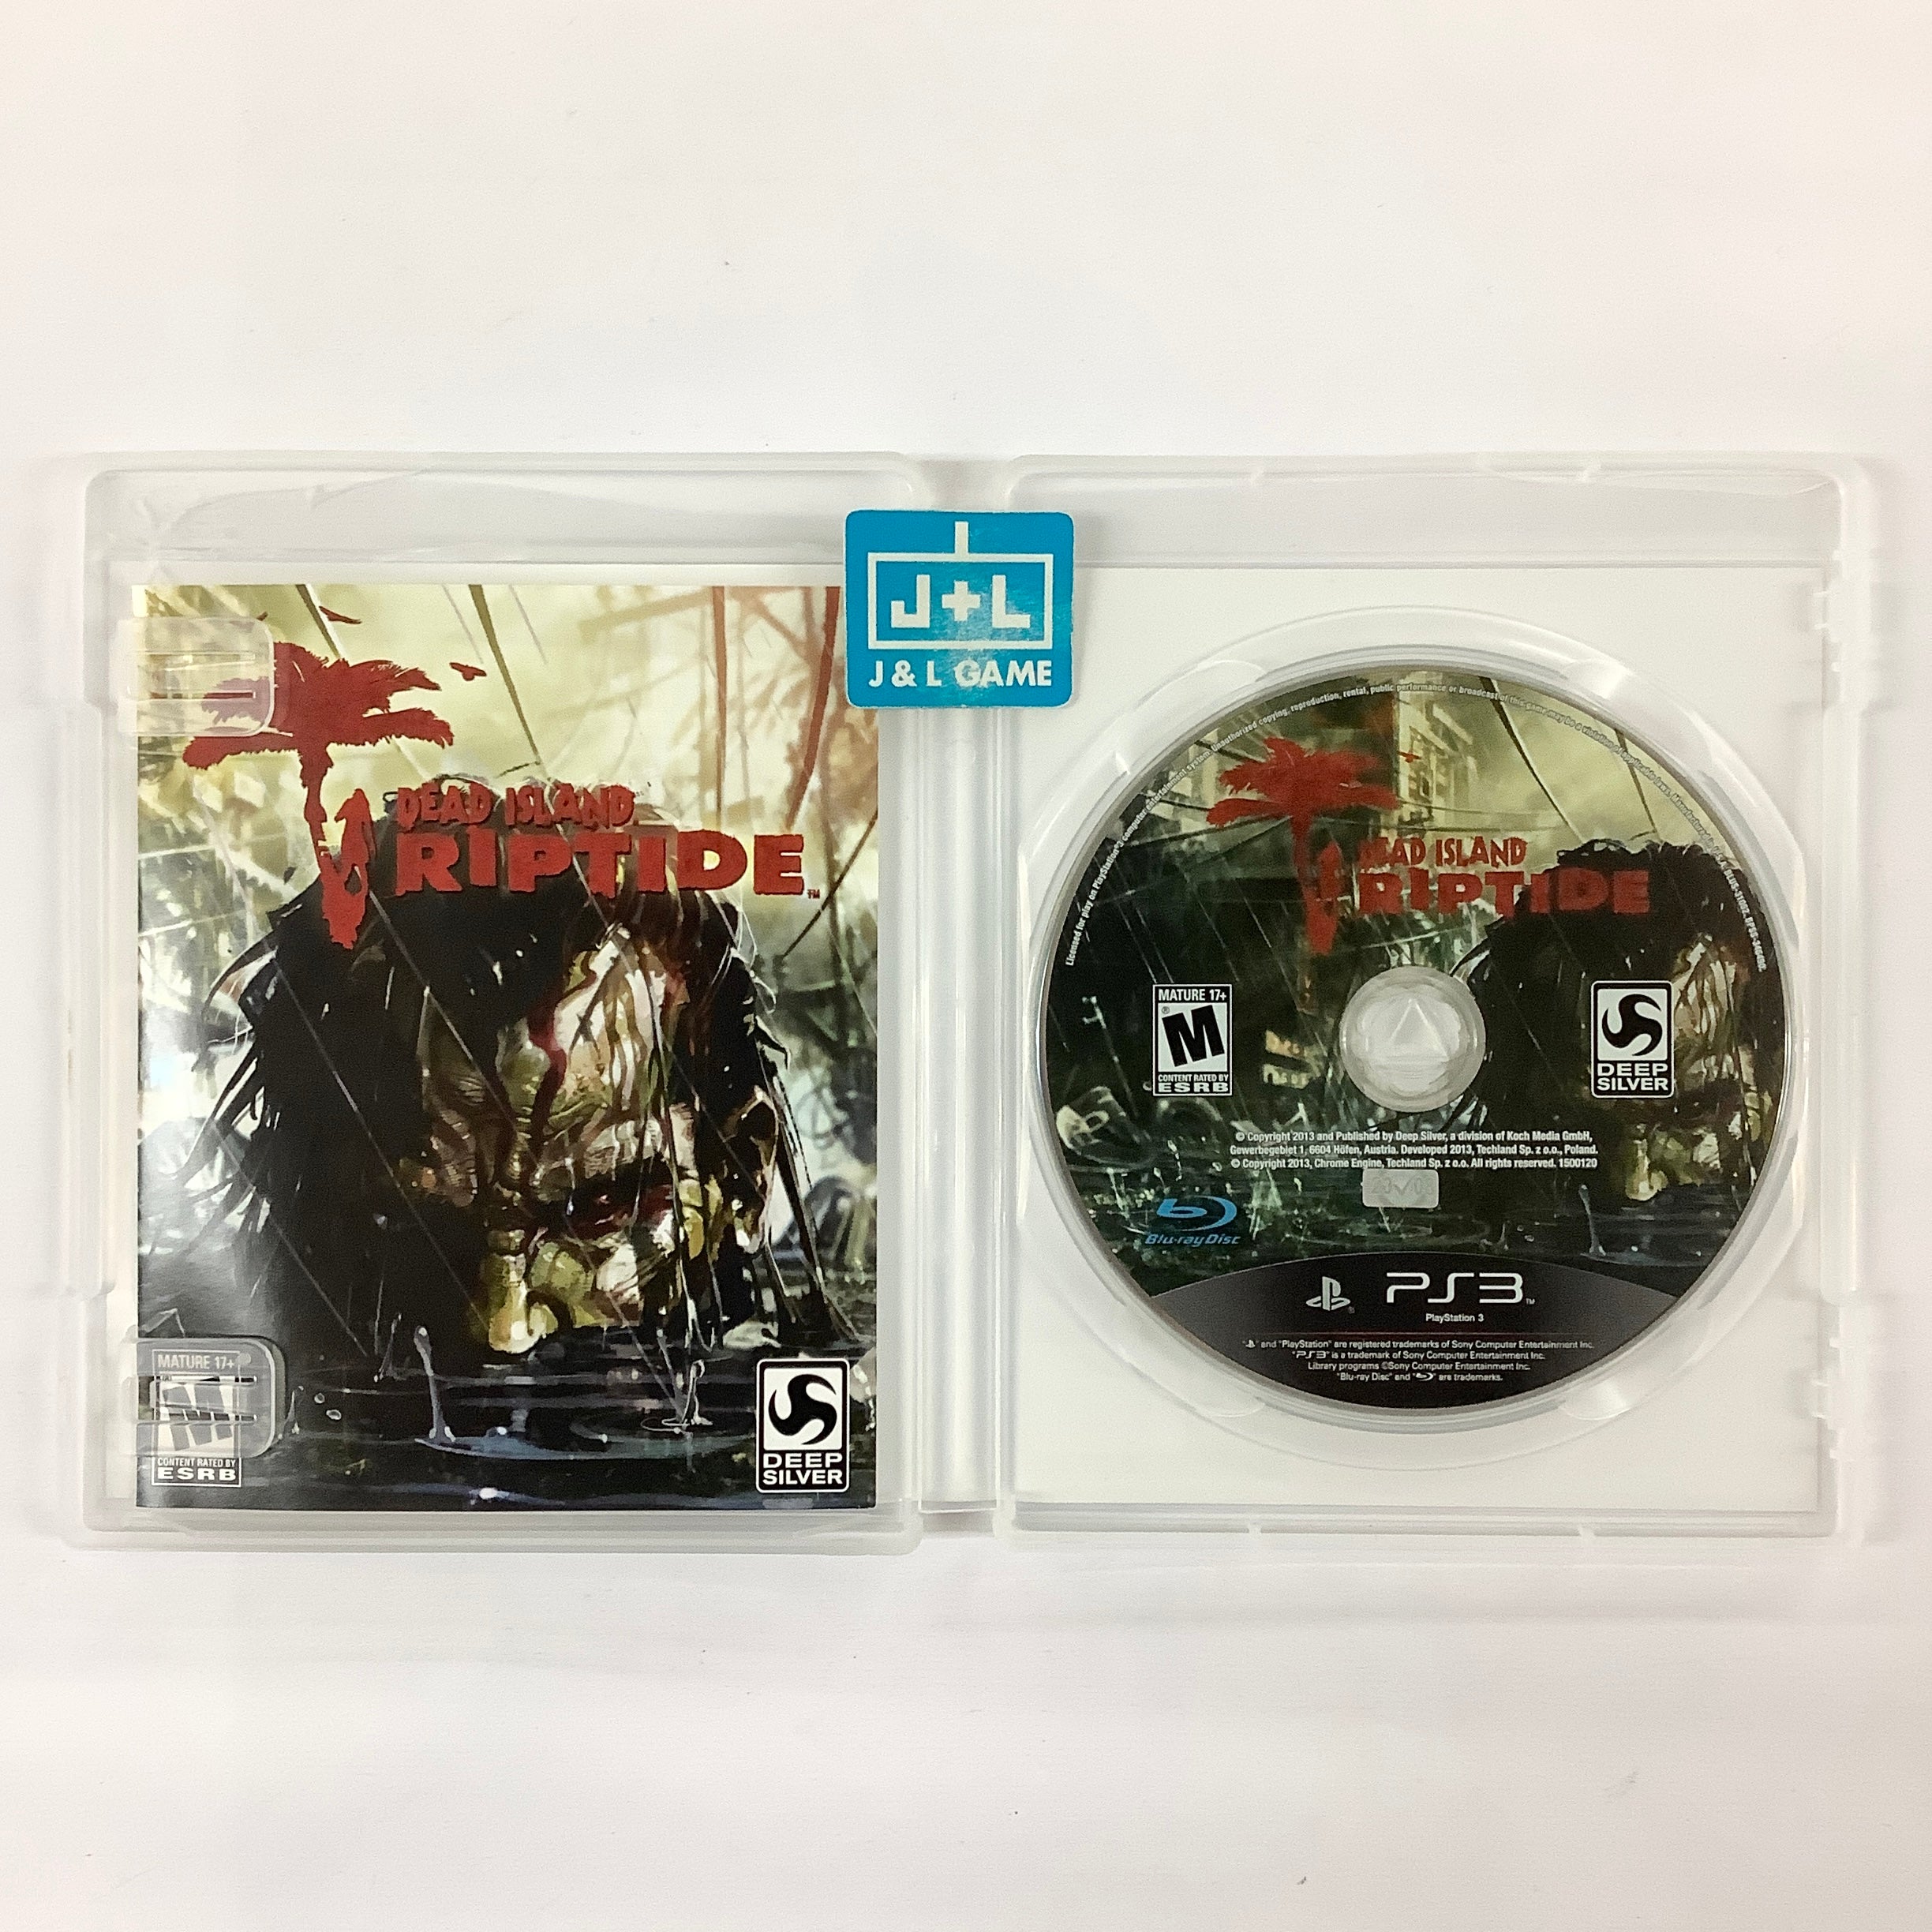 Dead Island: Riptide - (PS3) PlayStation 3 [Pre-Owned] Video Games Deep Silver   